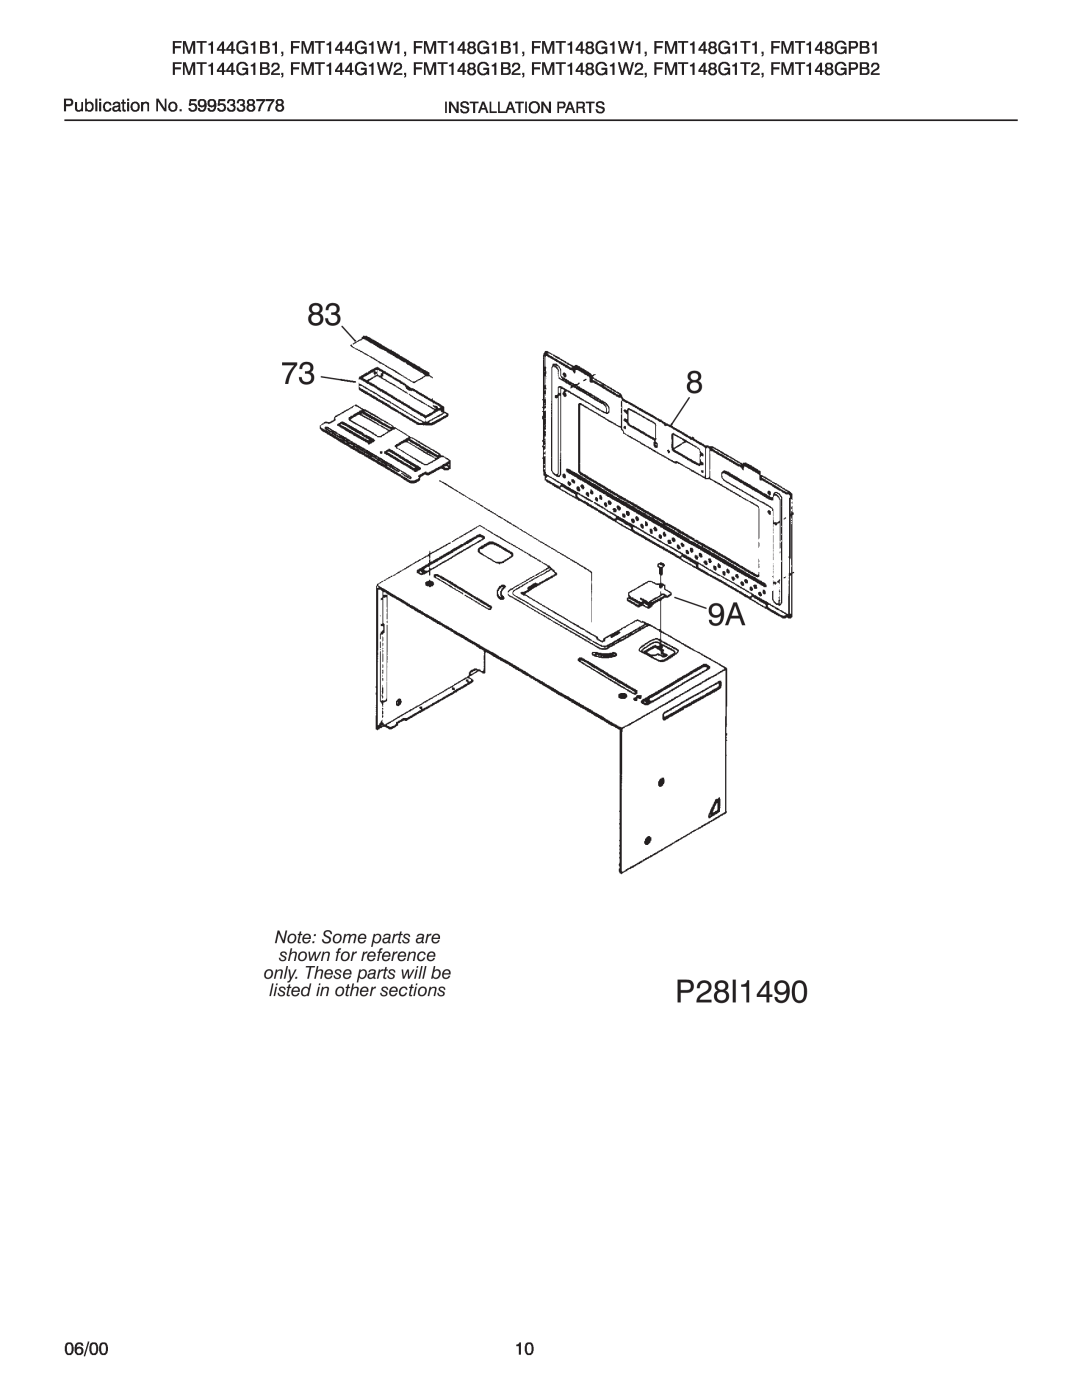 Frigidaire FMT144G1W1, FMT148G1B1 installation instructions P28I1490, Publication No, listed in other sections, 06/00 